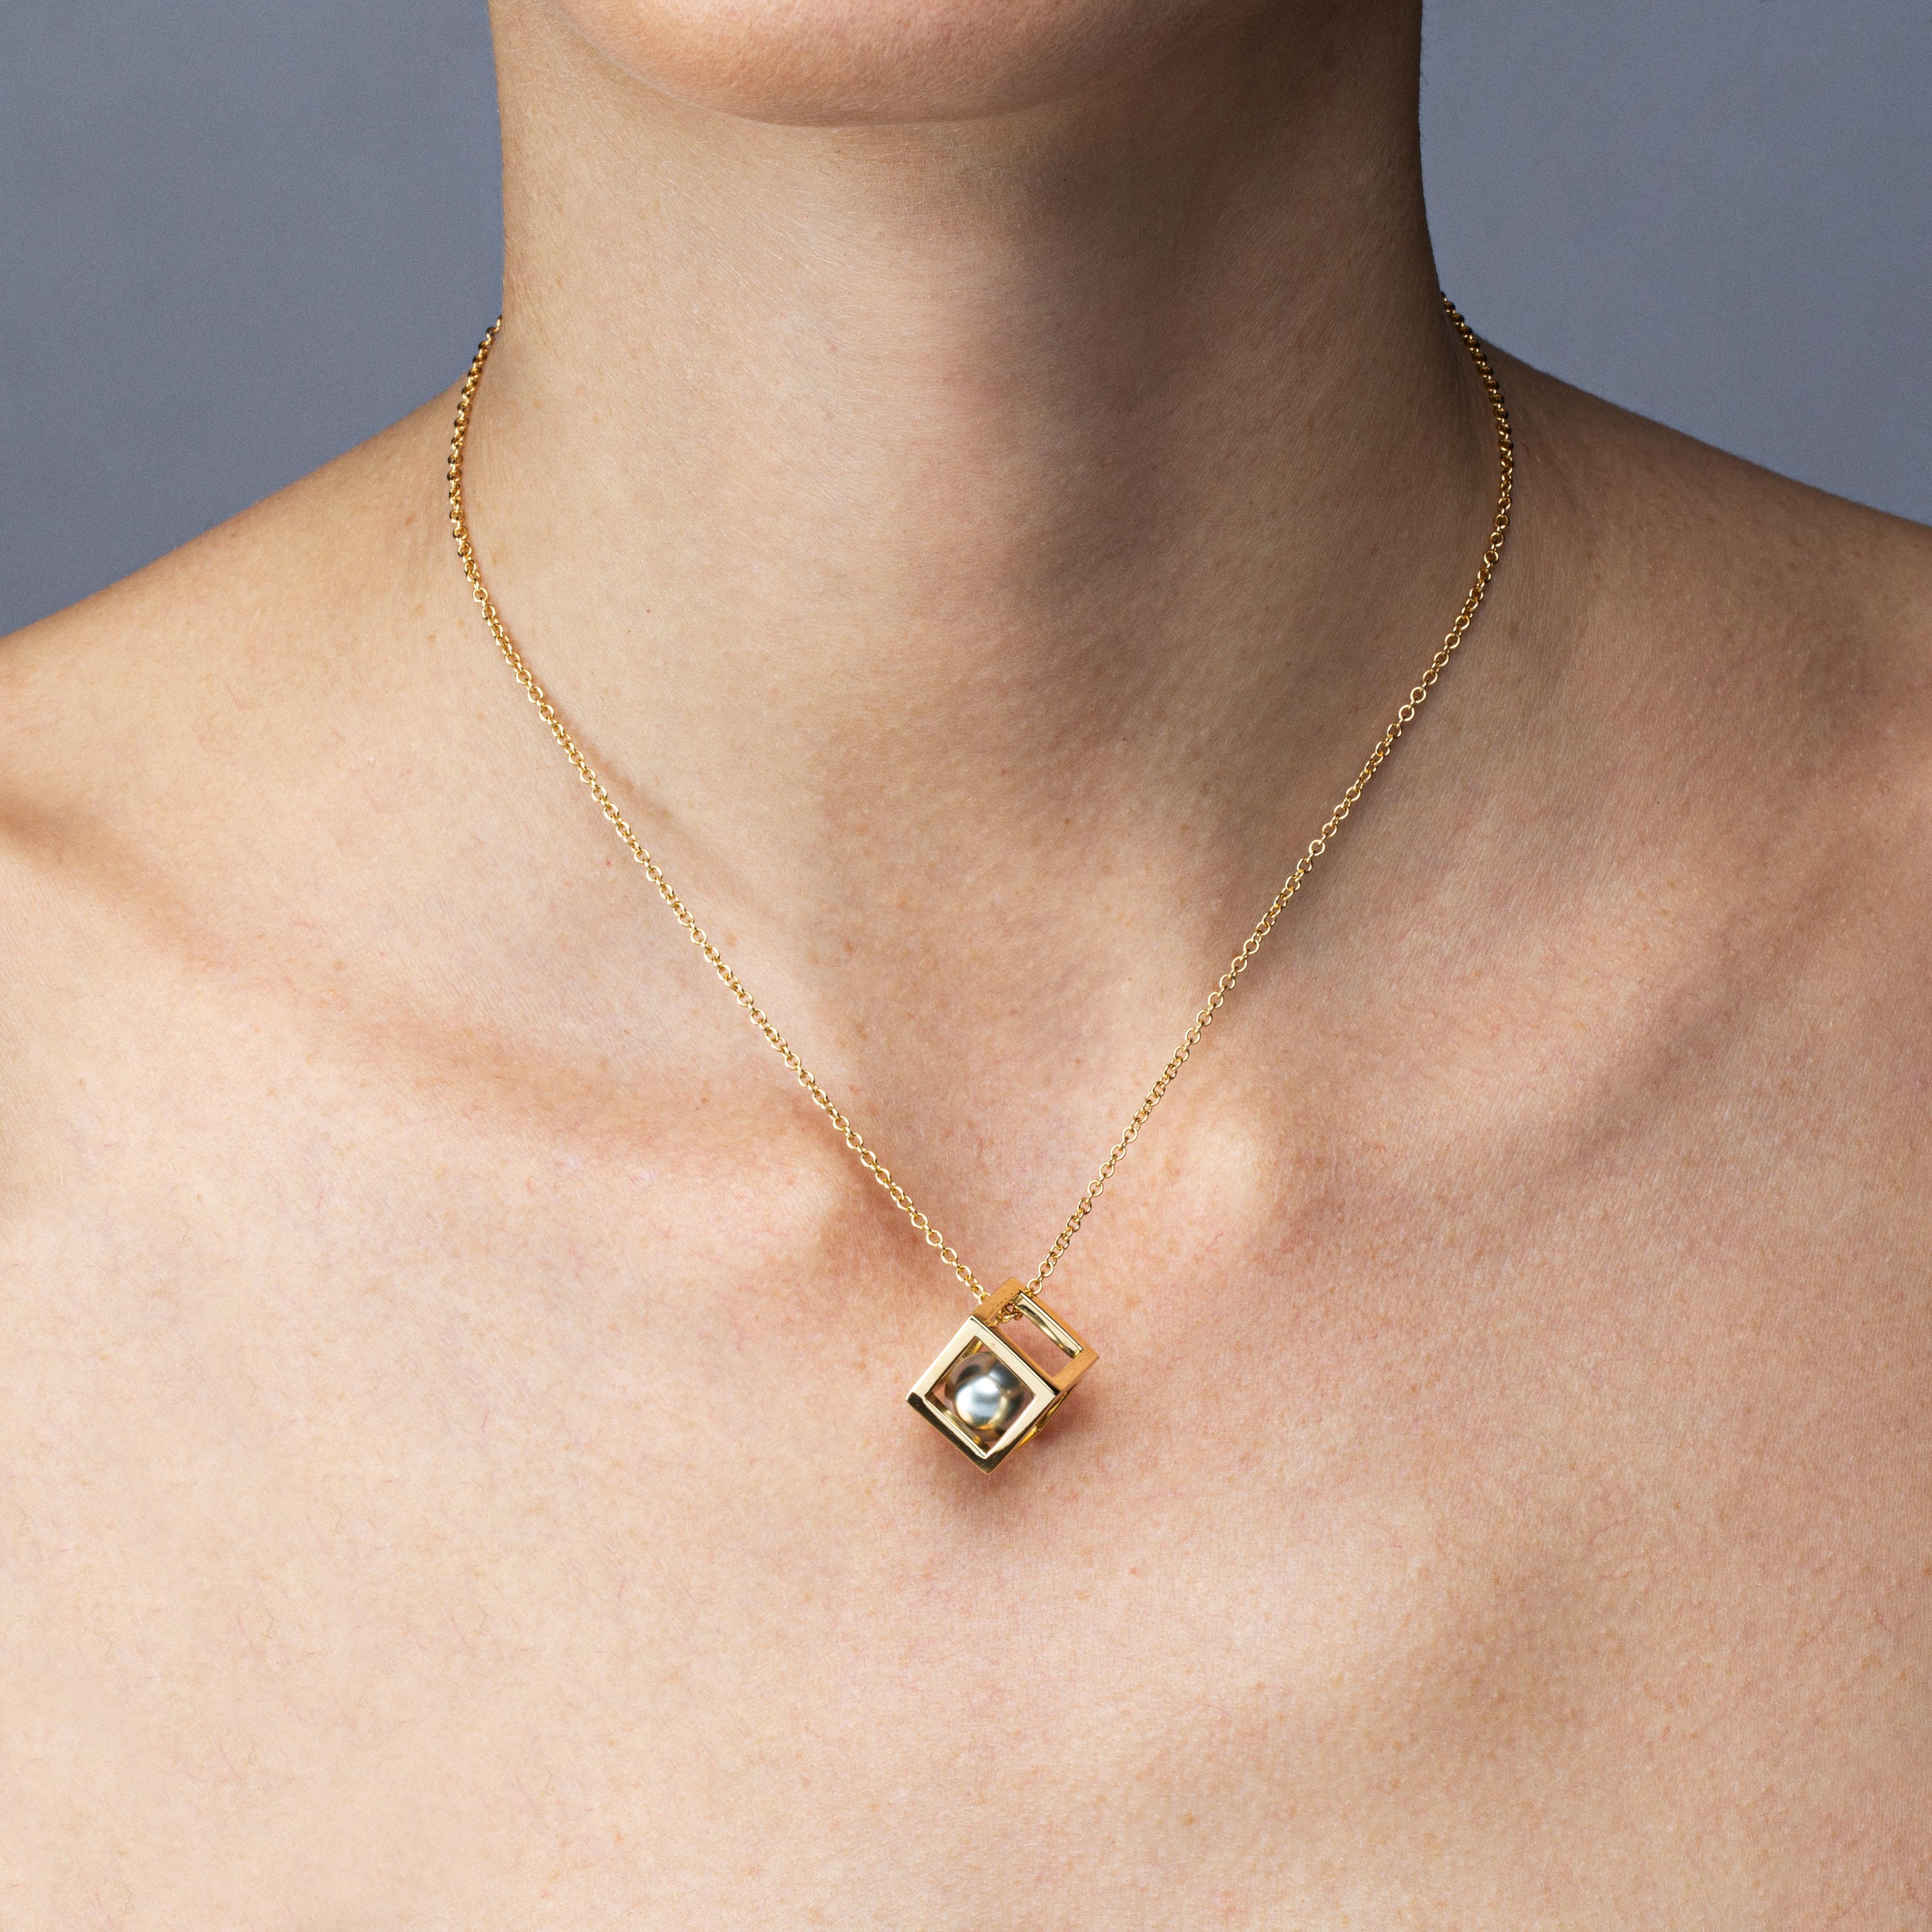 Alex Jona design collection, hand crafted in Italy, 18 Karat yellow gold cube pendant measuring 13.40mmx13.40mm, enclosing a 12mm Tahiti grey pearl weighing 25 carats, suspending from a 39cm long chain necklace.

Alex Jona jewels stand out, not only